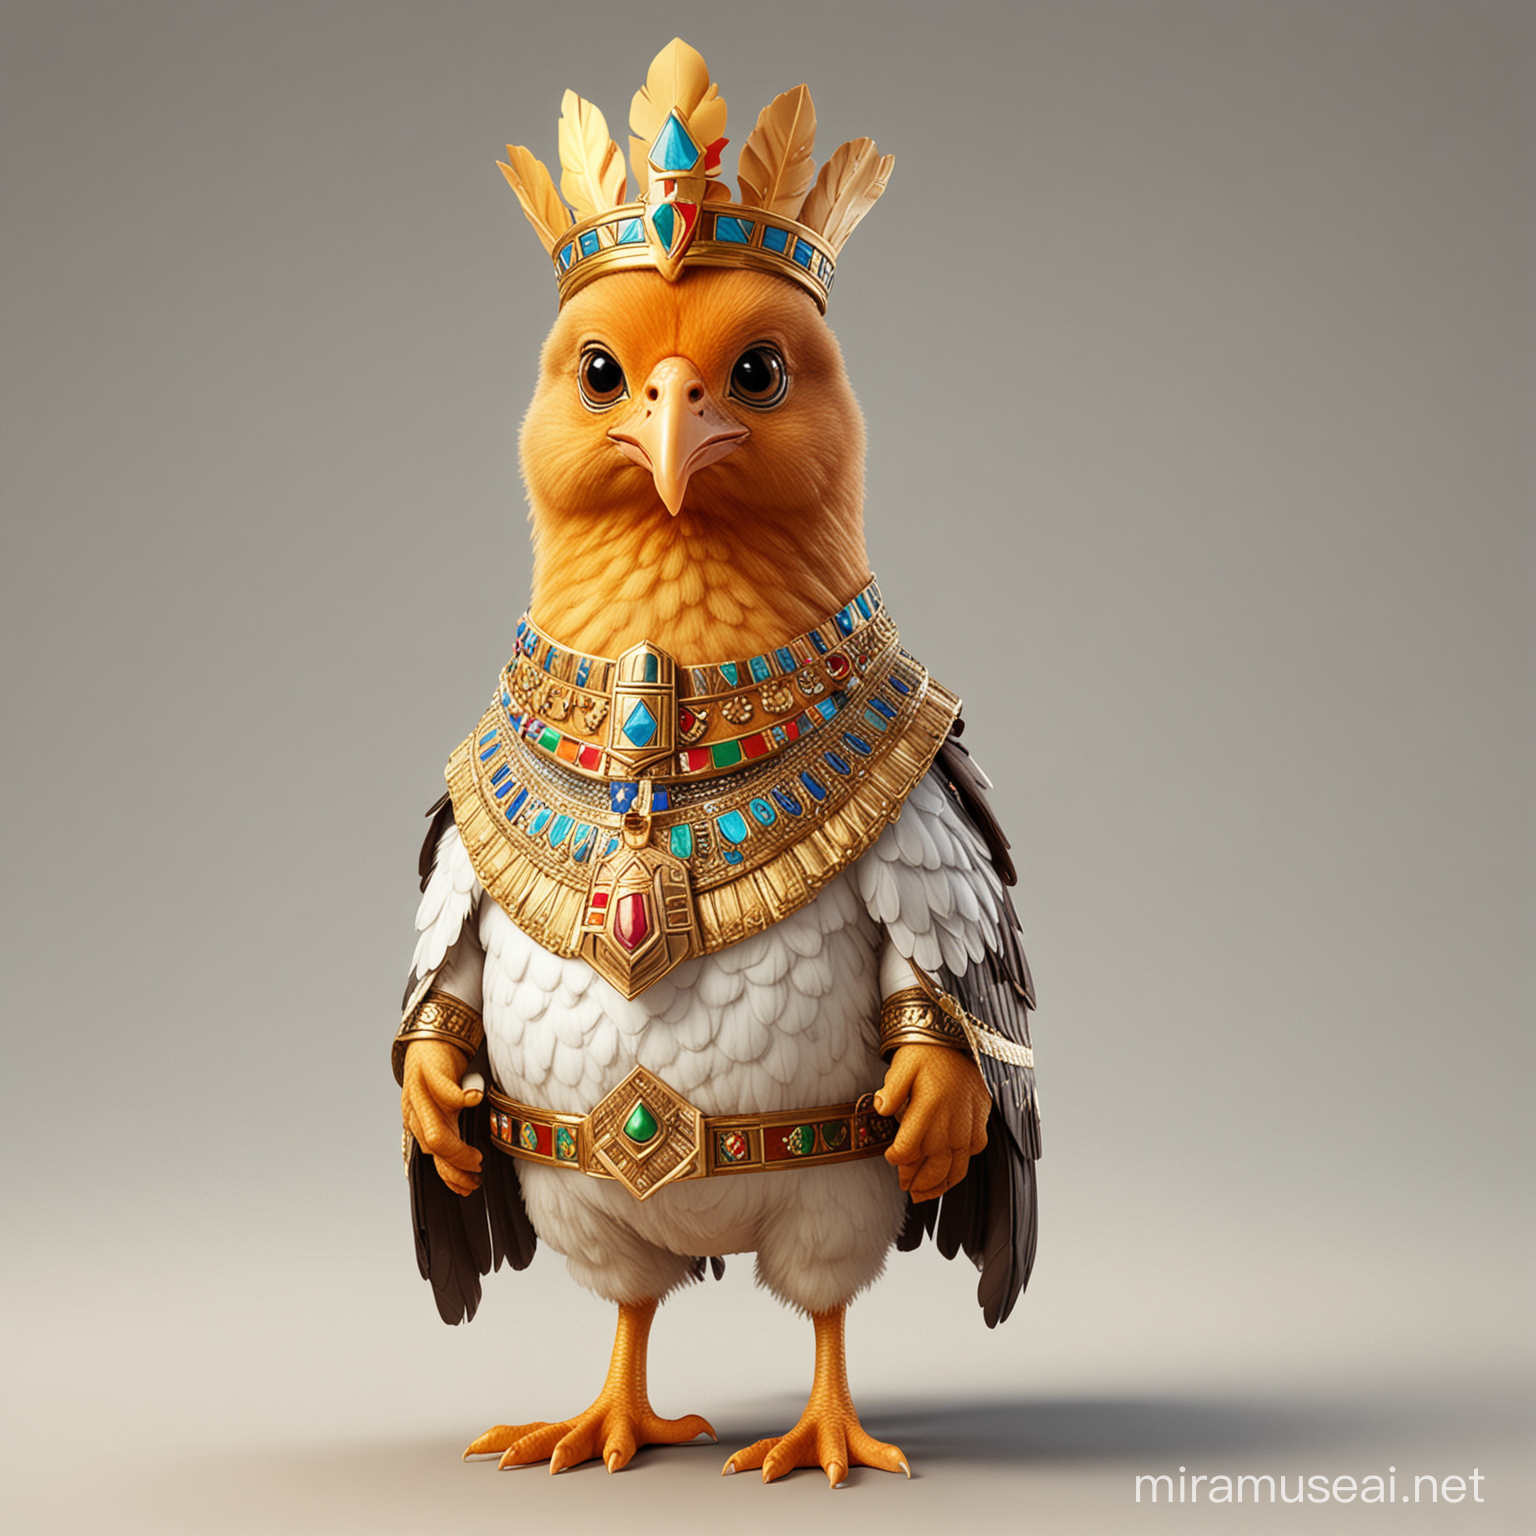 Cartoon Pharaoh Chicken Adorable Full Body Illustration with Crown Clothes